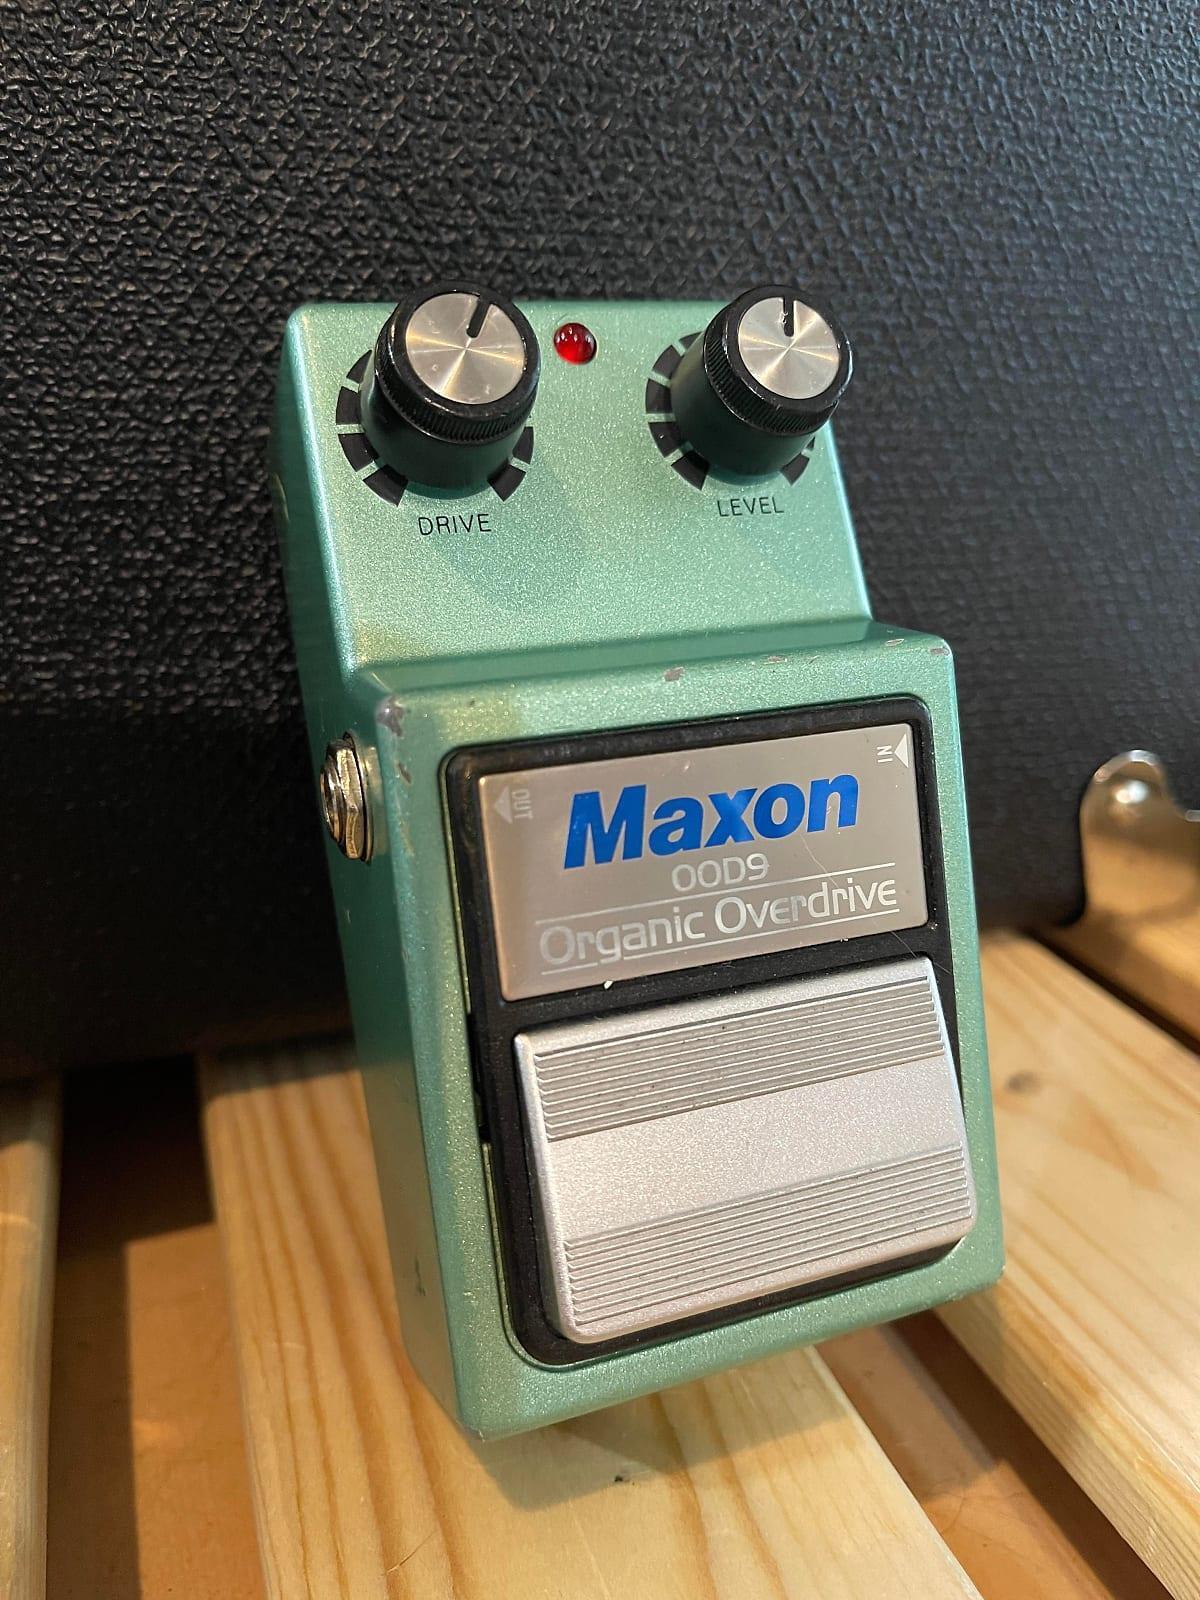 Used Maxon OOD-9 Organic Overdrive - Sweetwater's Gear Exchange